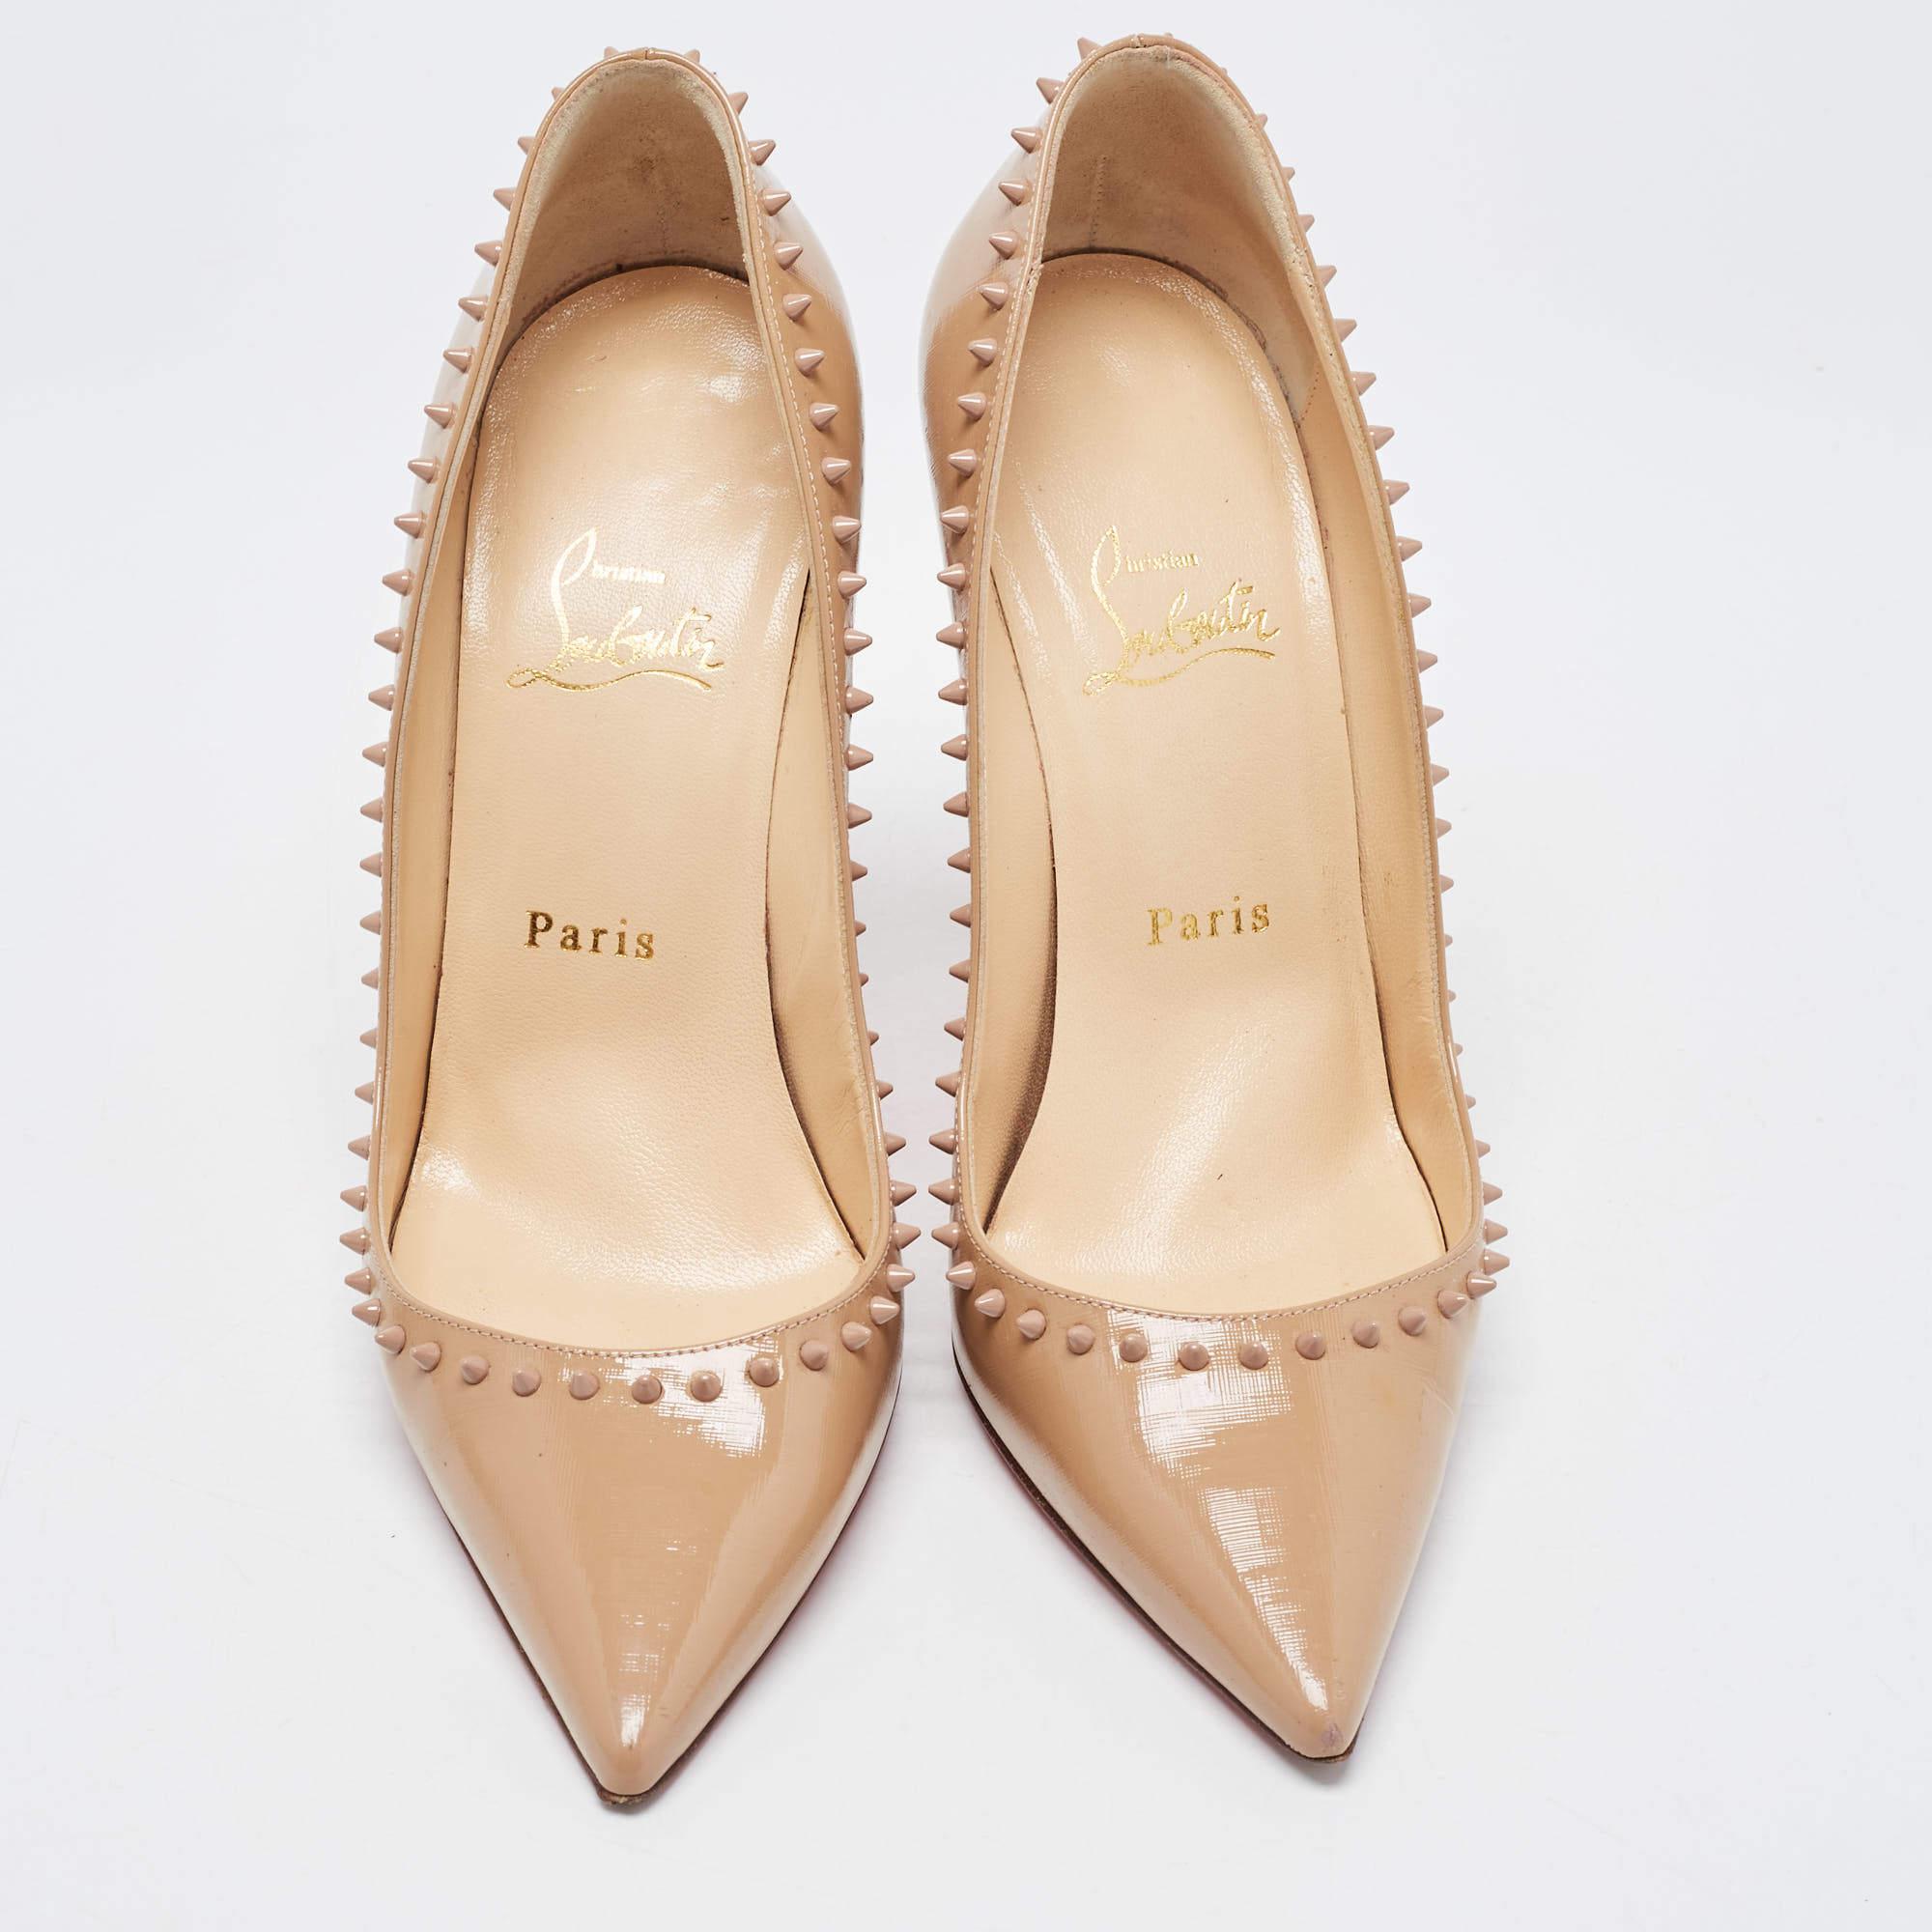 Complement your well-put-together outfit with these authentic Christian Louboutin pumps. Timeless and classy, they have an amazing construction for enduring quality and comfortable fit.

Includes: Extra Heel Tips, Original Box

